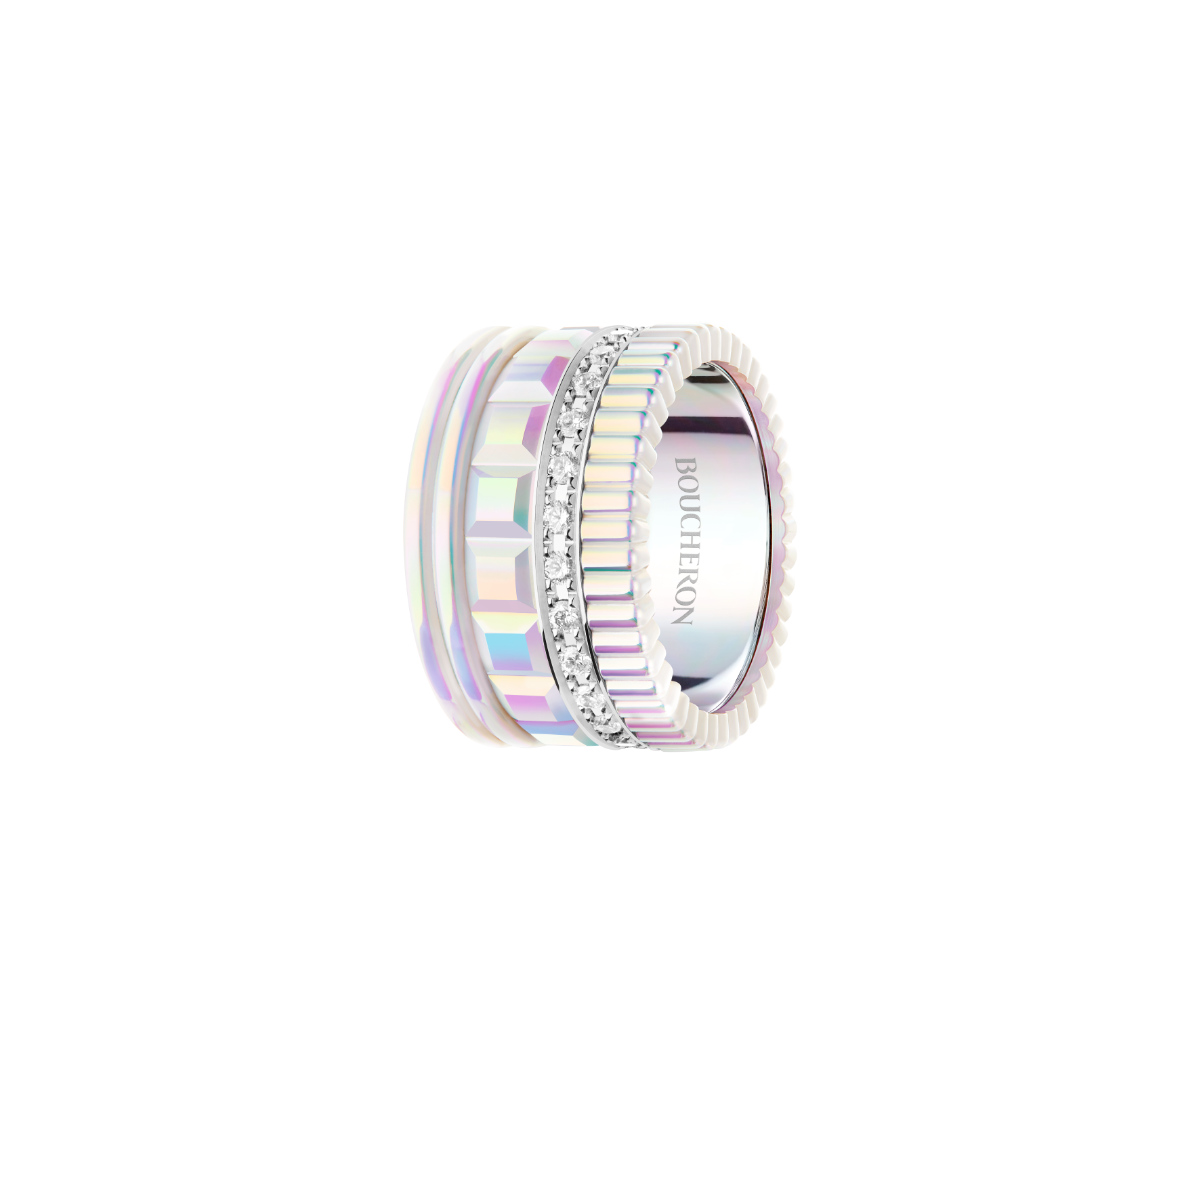 New Boucheron's Jewelry Capsule Collection - Holographique